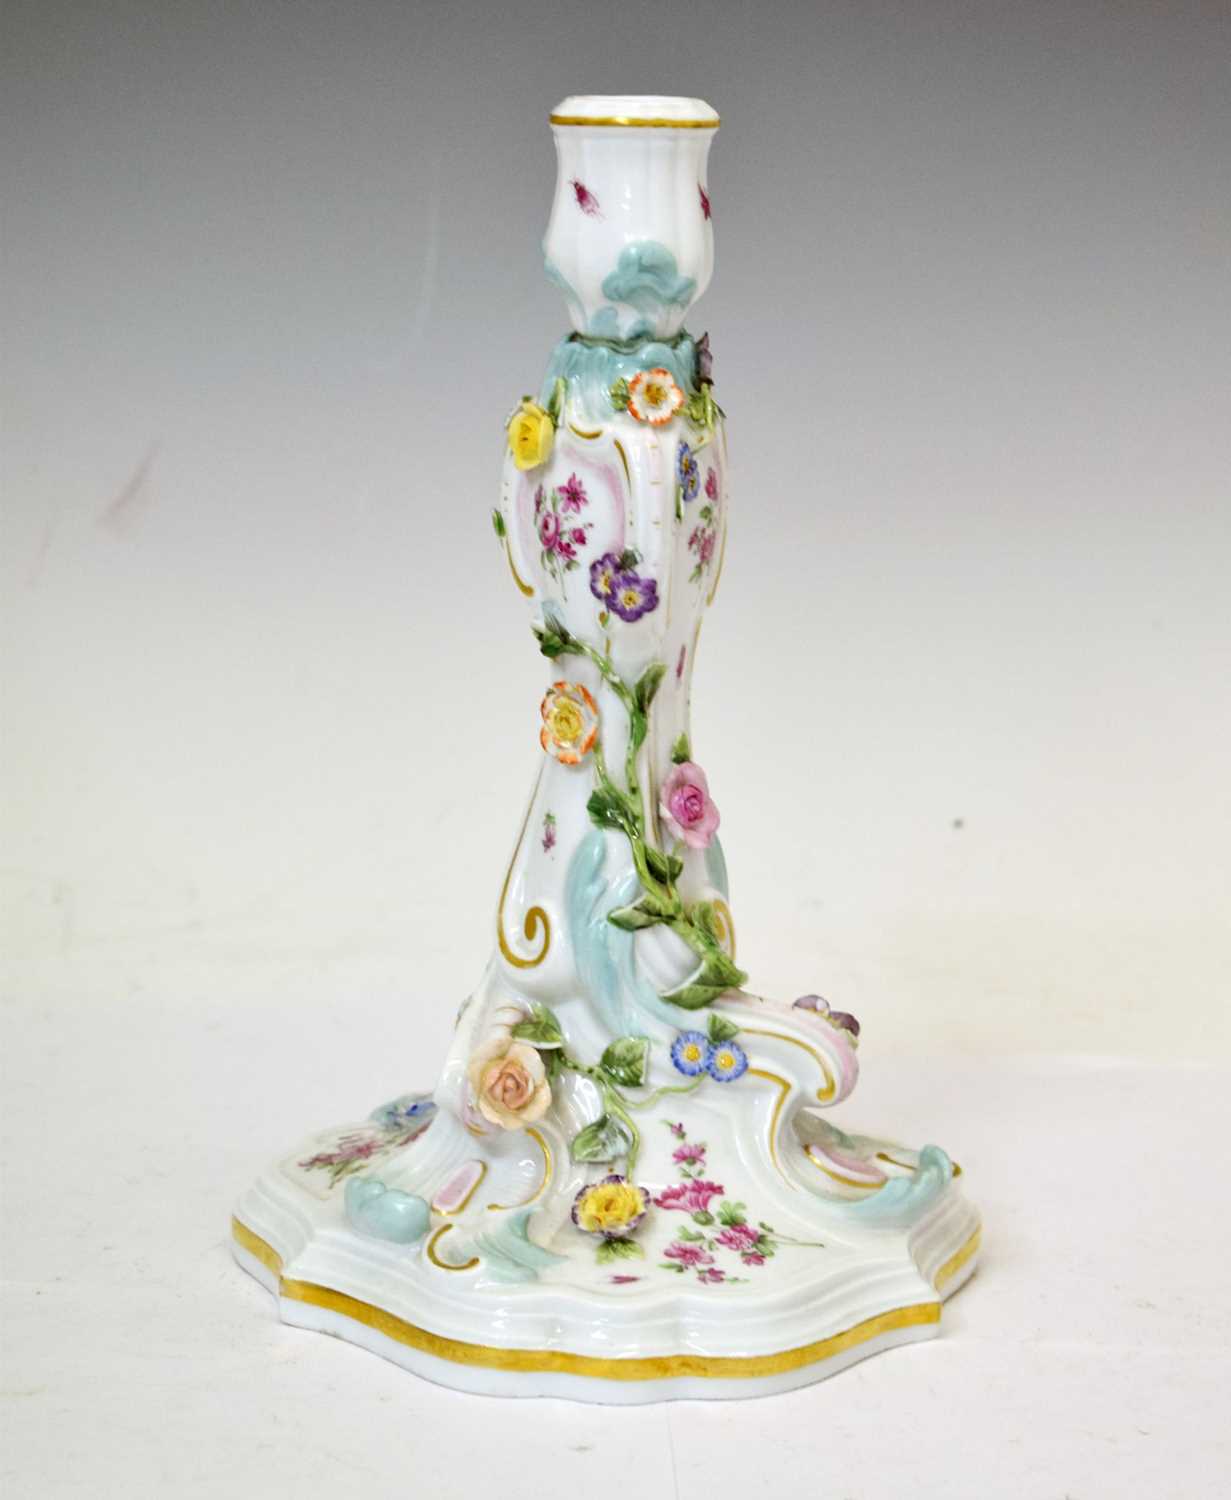 Late 19th/early 20th century Meissen porcelain candlestick